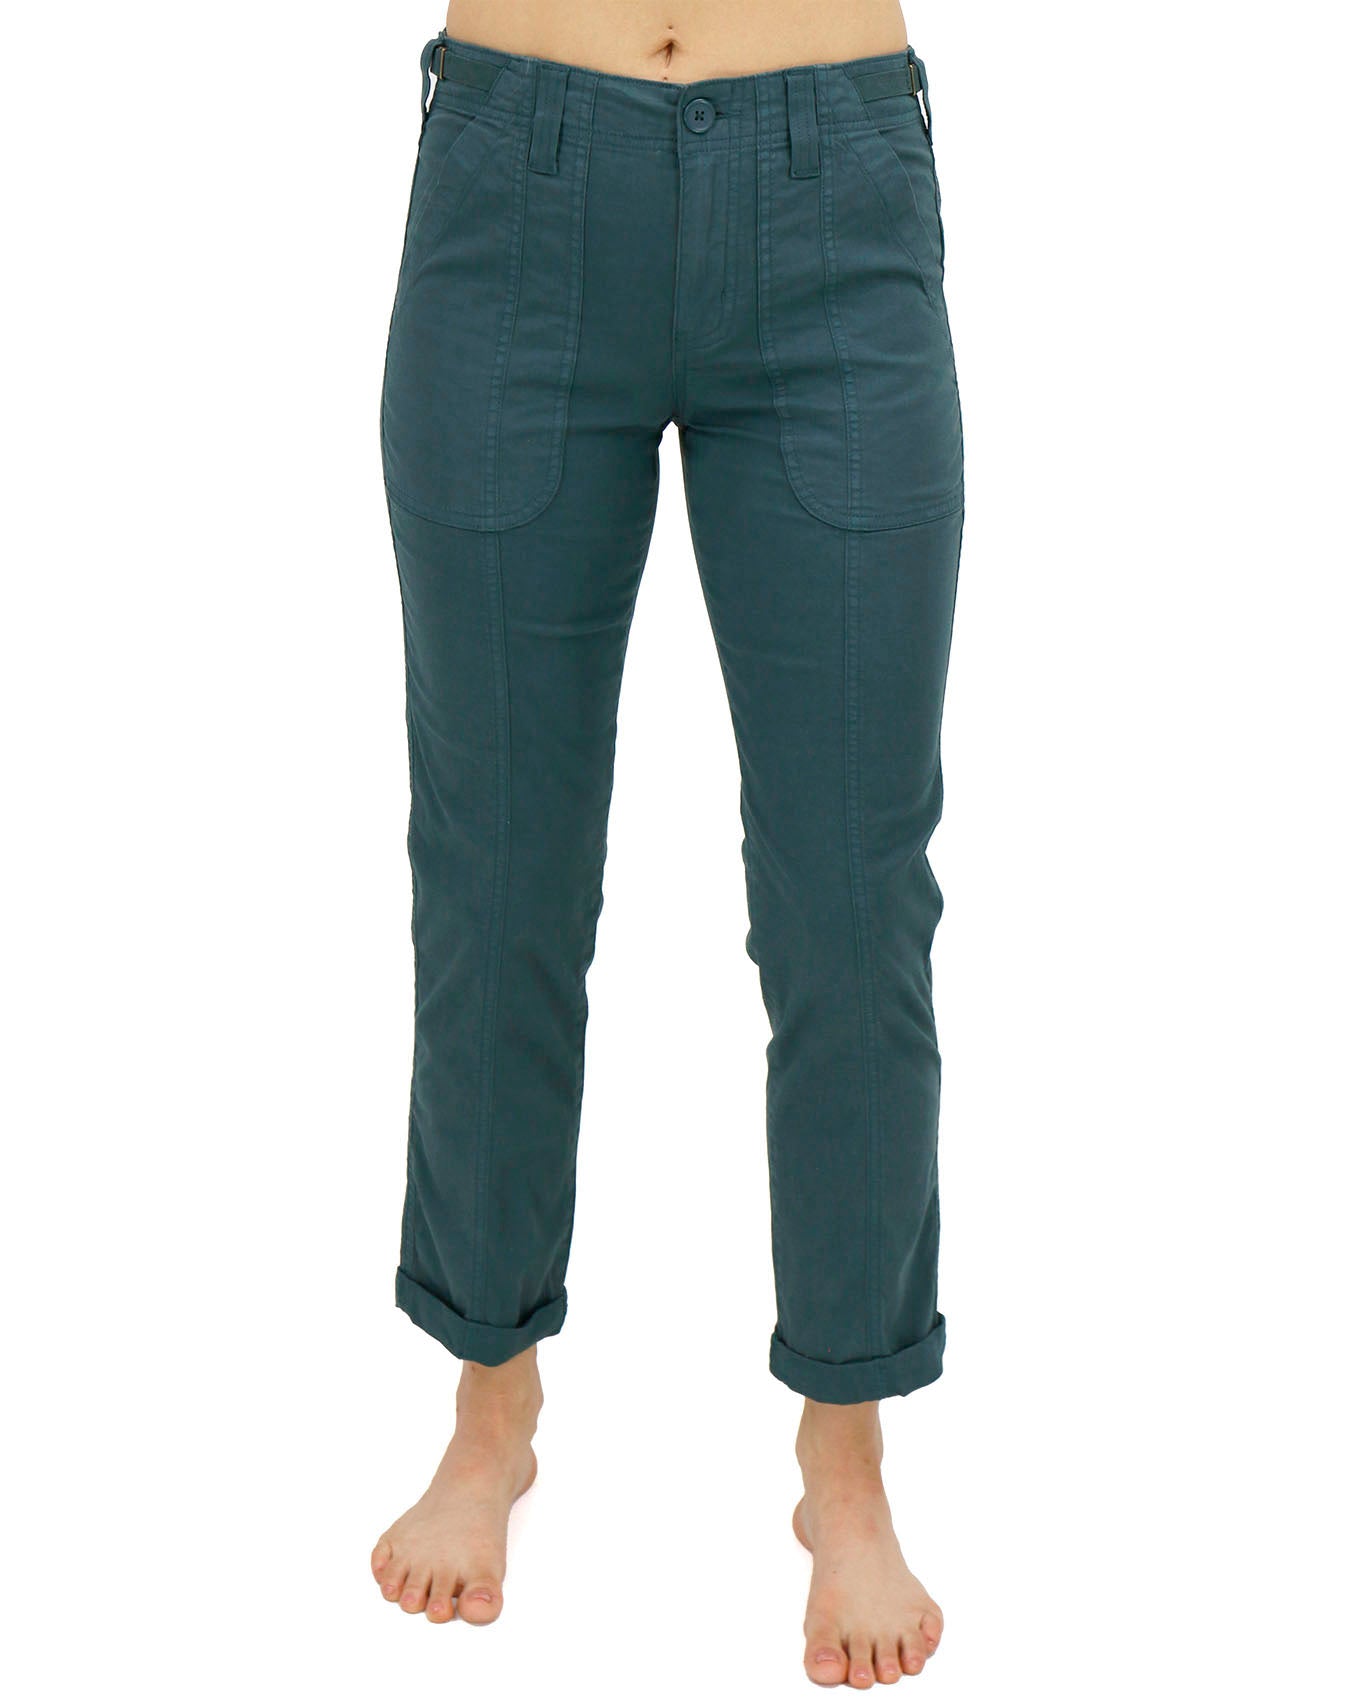 Front Stock shot of Green Camper Cargo Pants